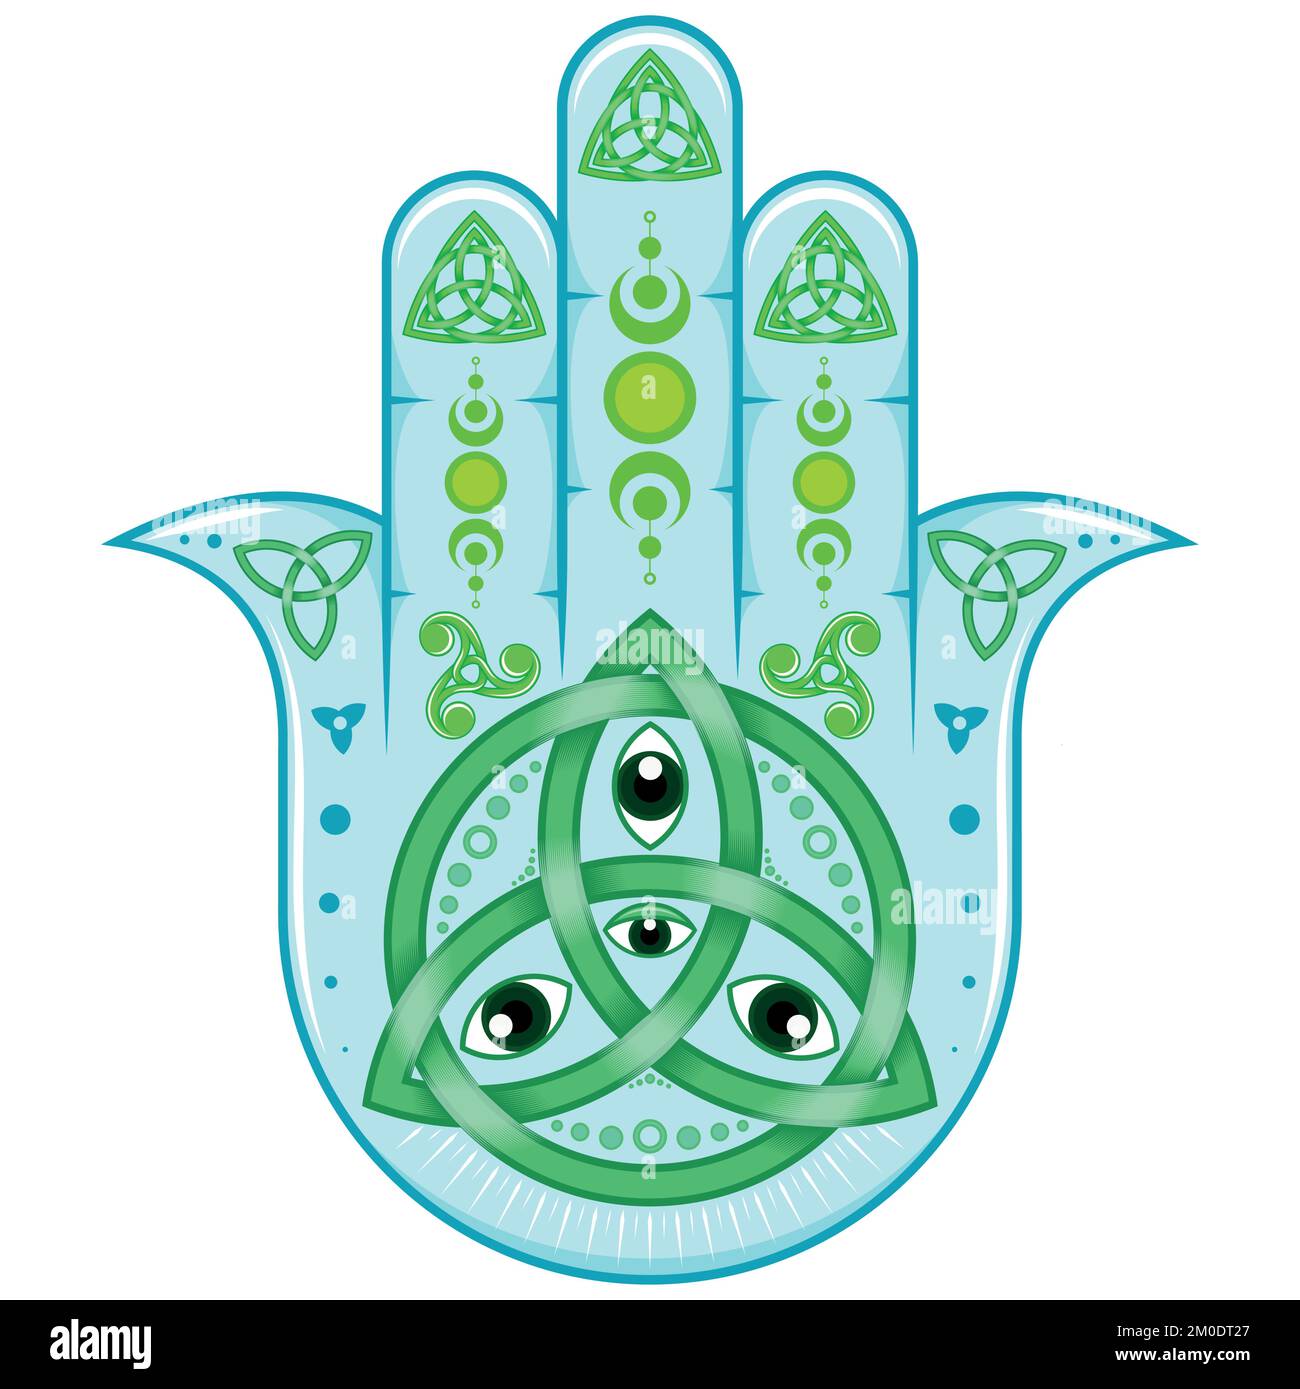 Hamsa symbol vector design with celtic style triquette and triskelion, hand of fatima symbol, illustration of Jamsa with god's eye Stock Vector